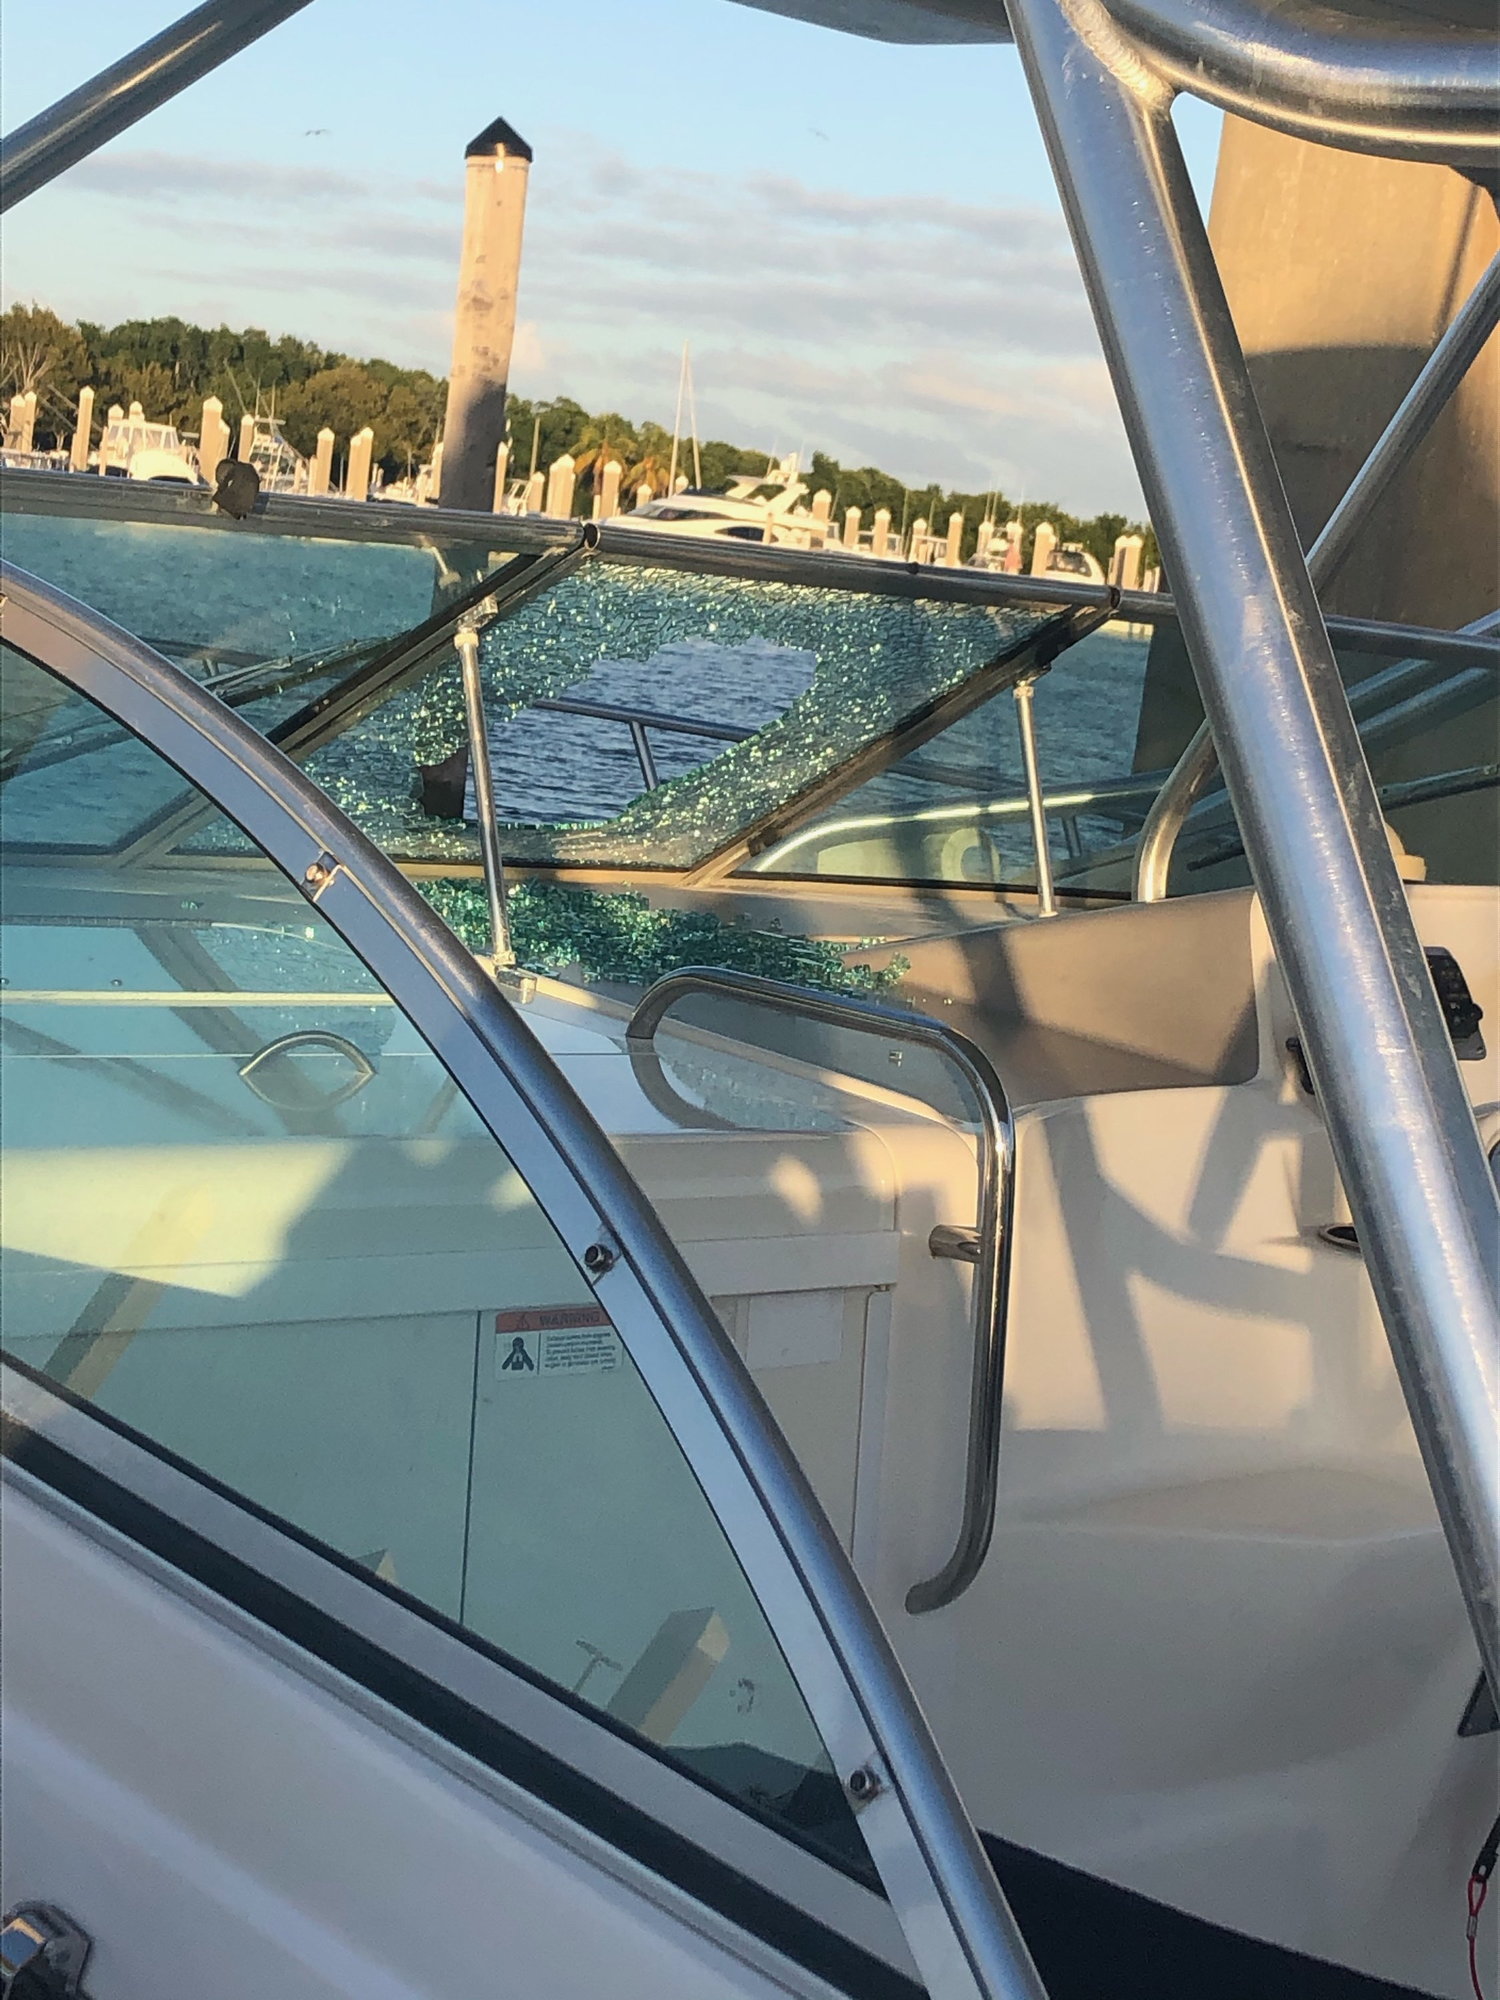 Boat windshield replacement in Miami? - The Hull Truth - Boating